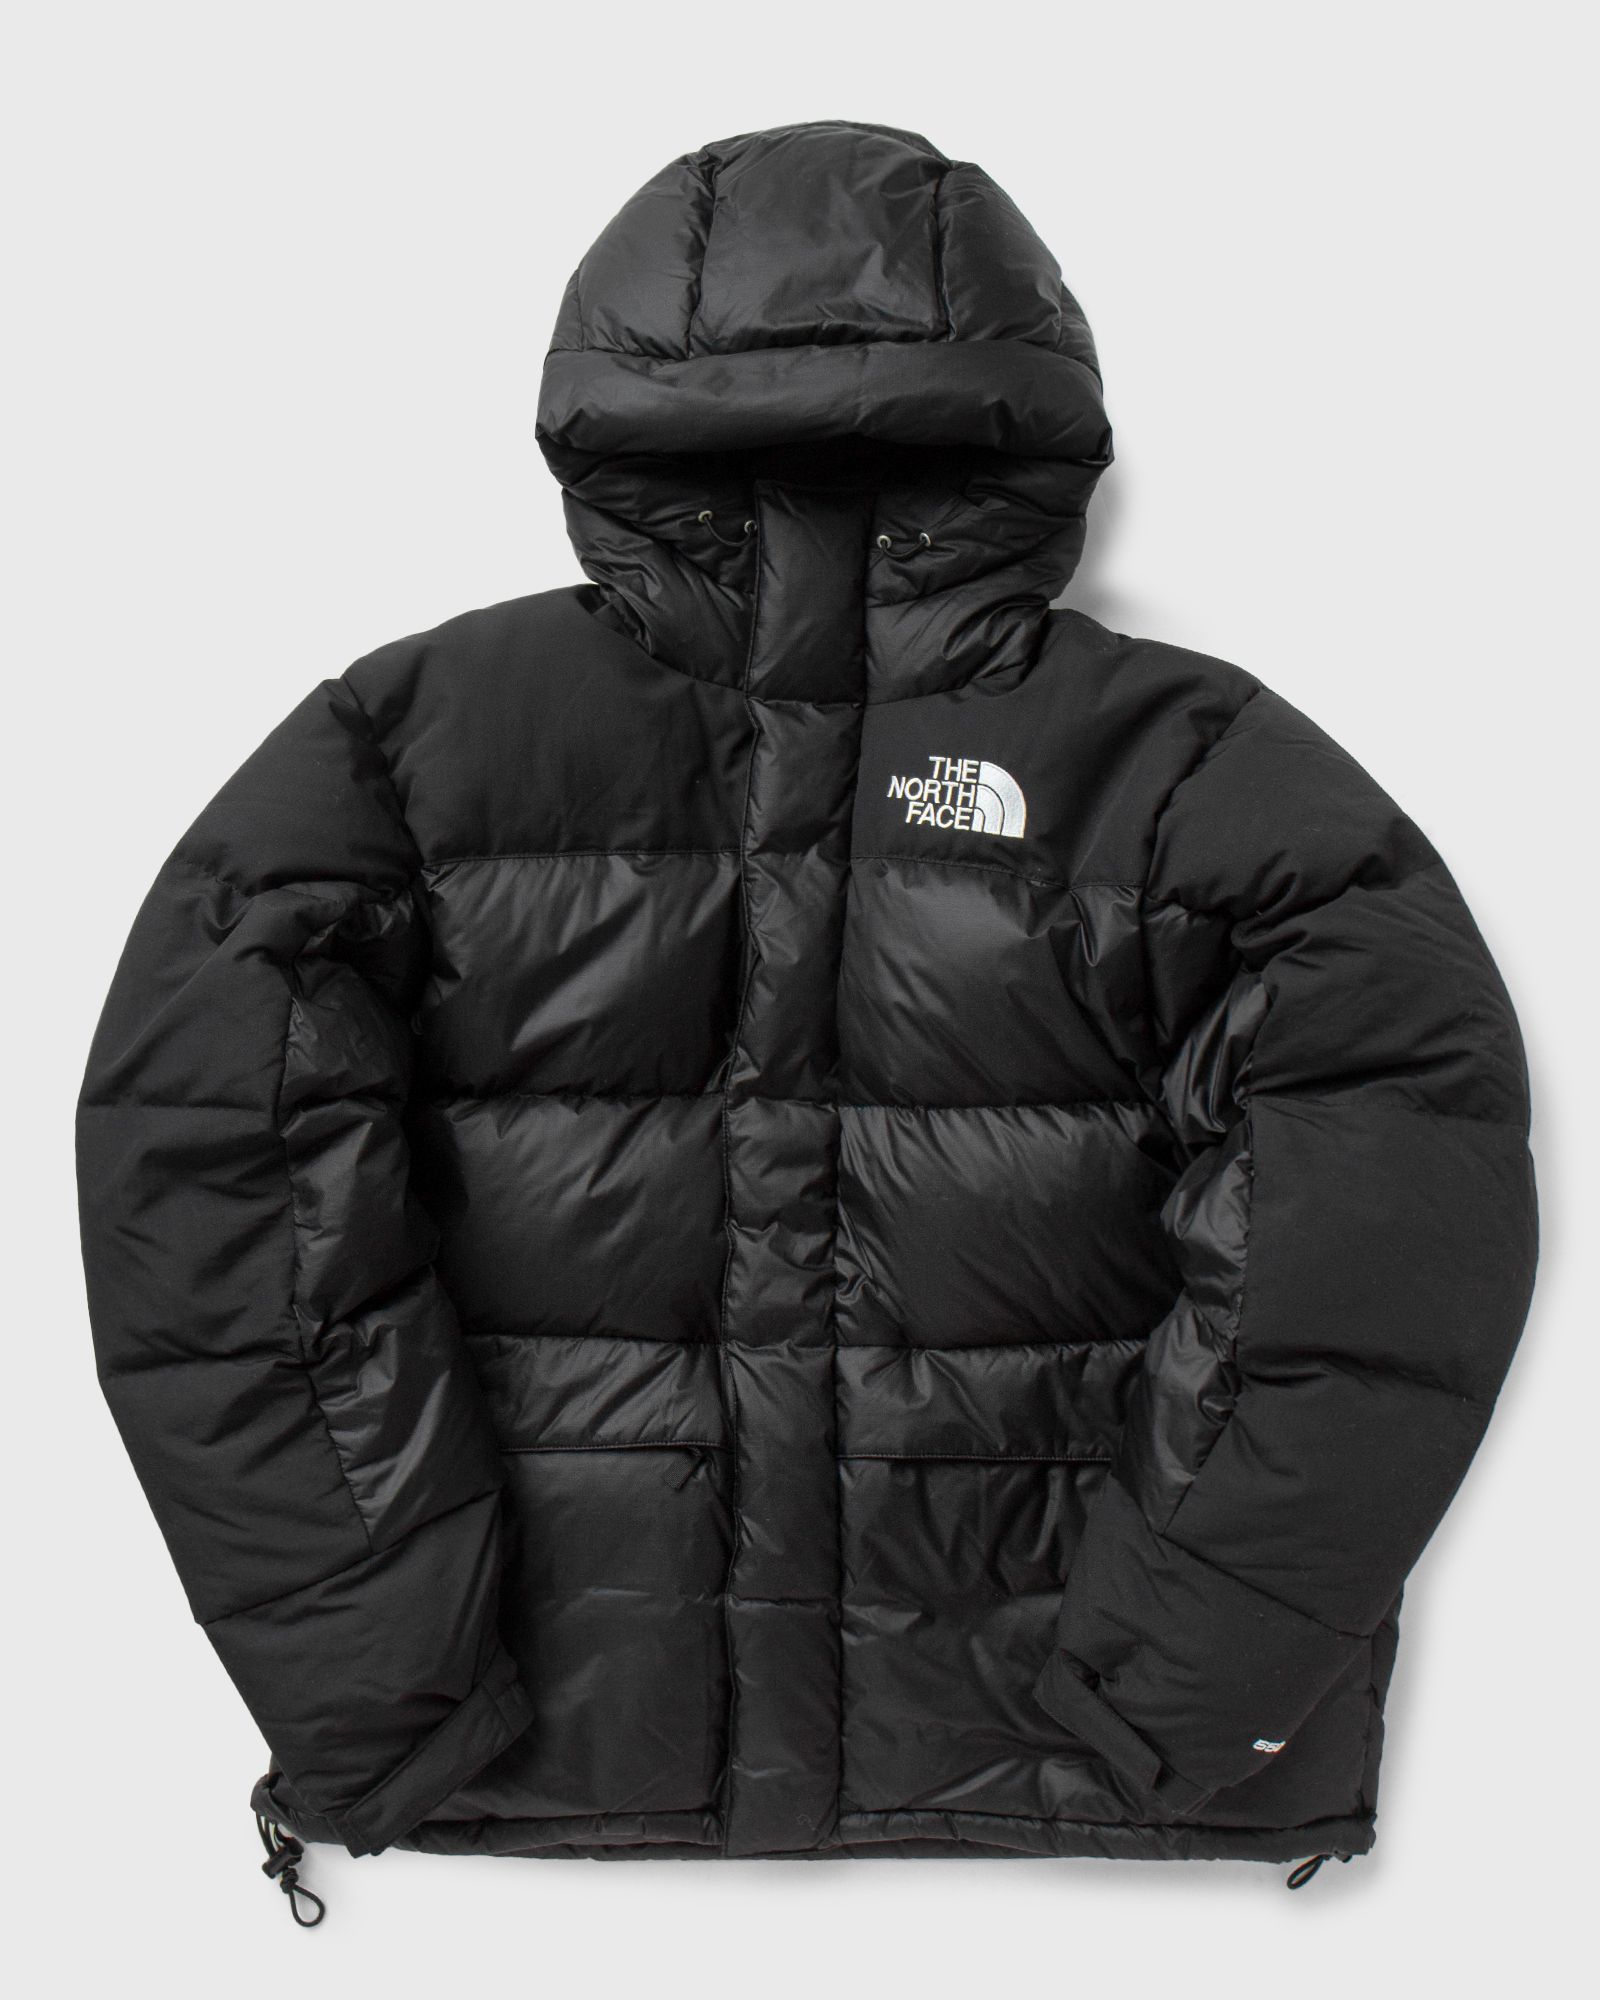 The North Face Himalayan Down Parka men Down & Puffer Jackets|Parkas black in Größe:XL von The North Face